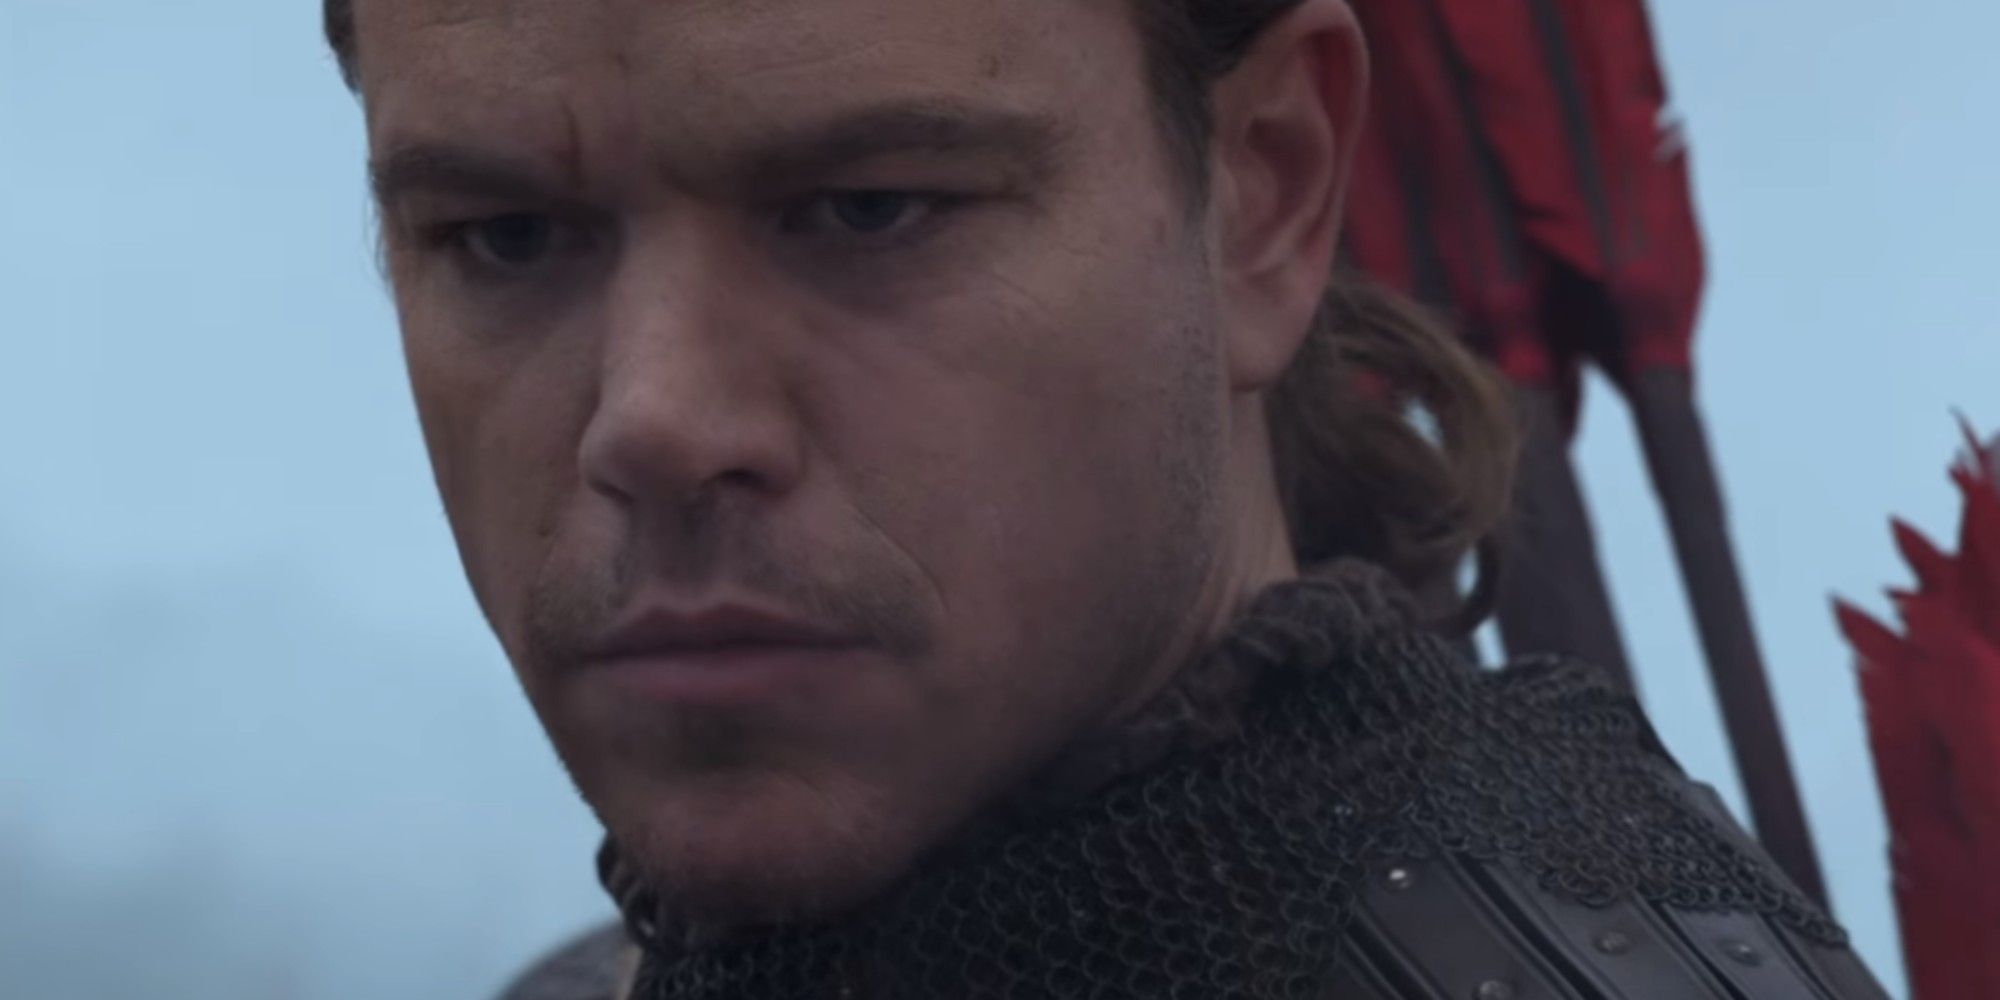 Why Matt Damon's The Great Wall Is So Controversial